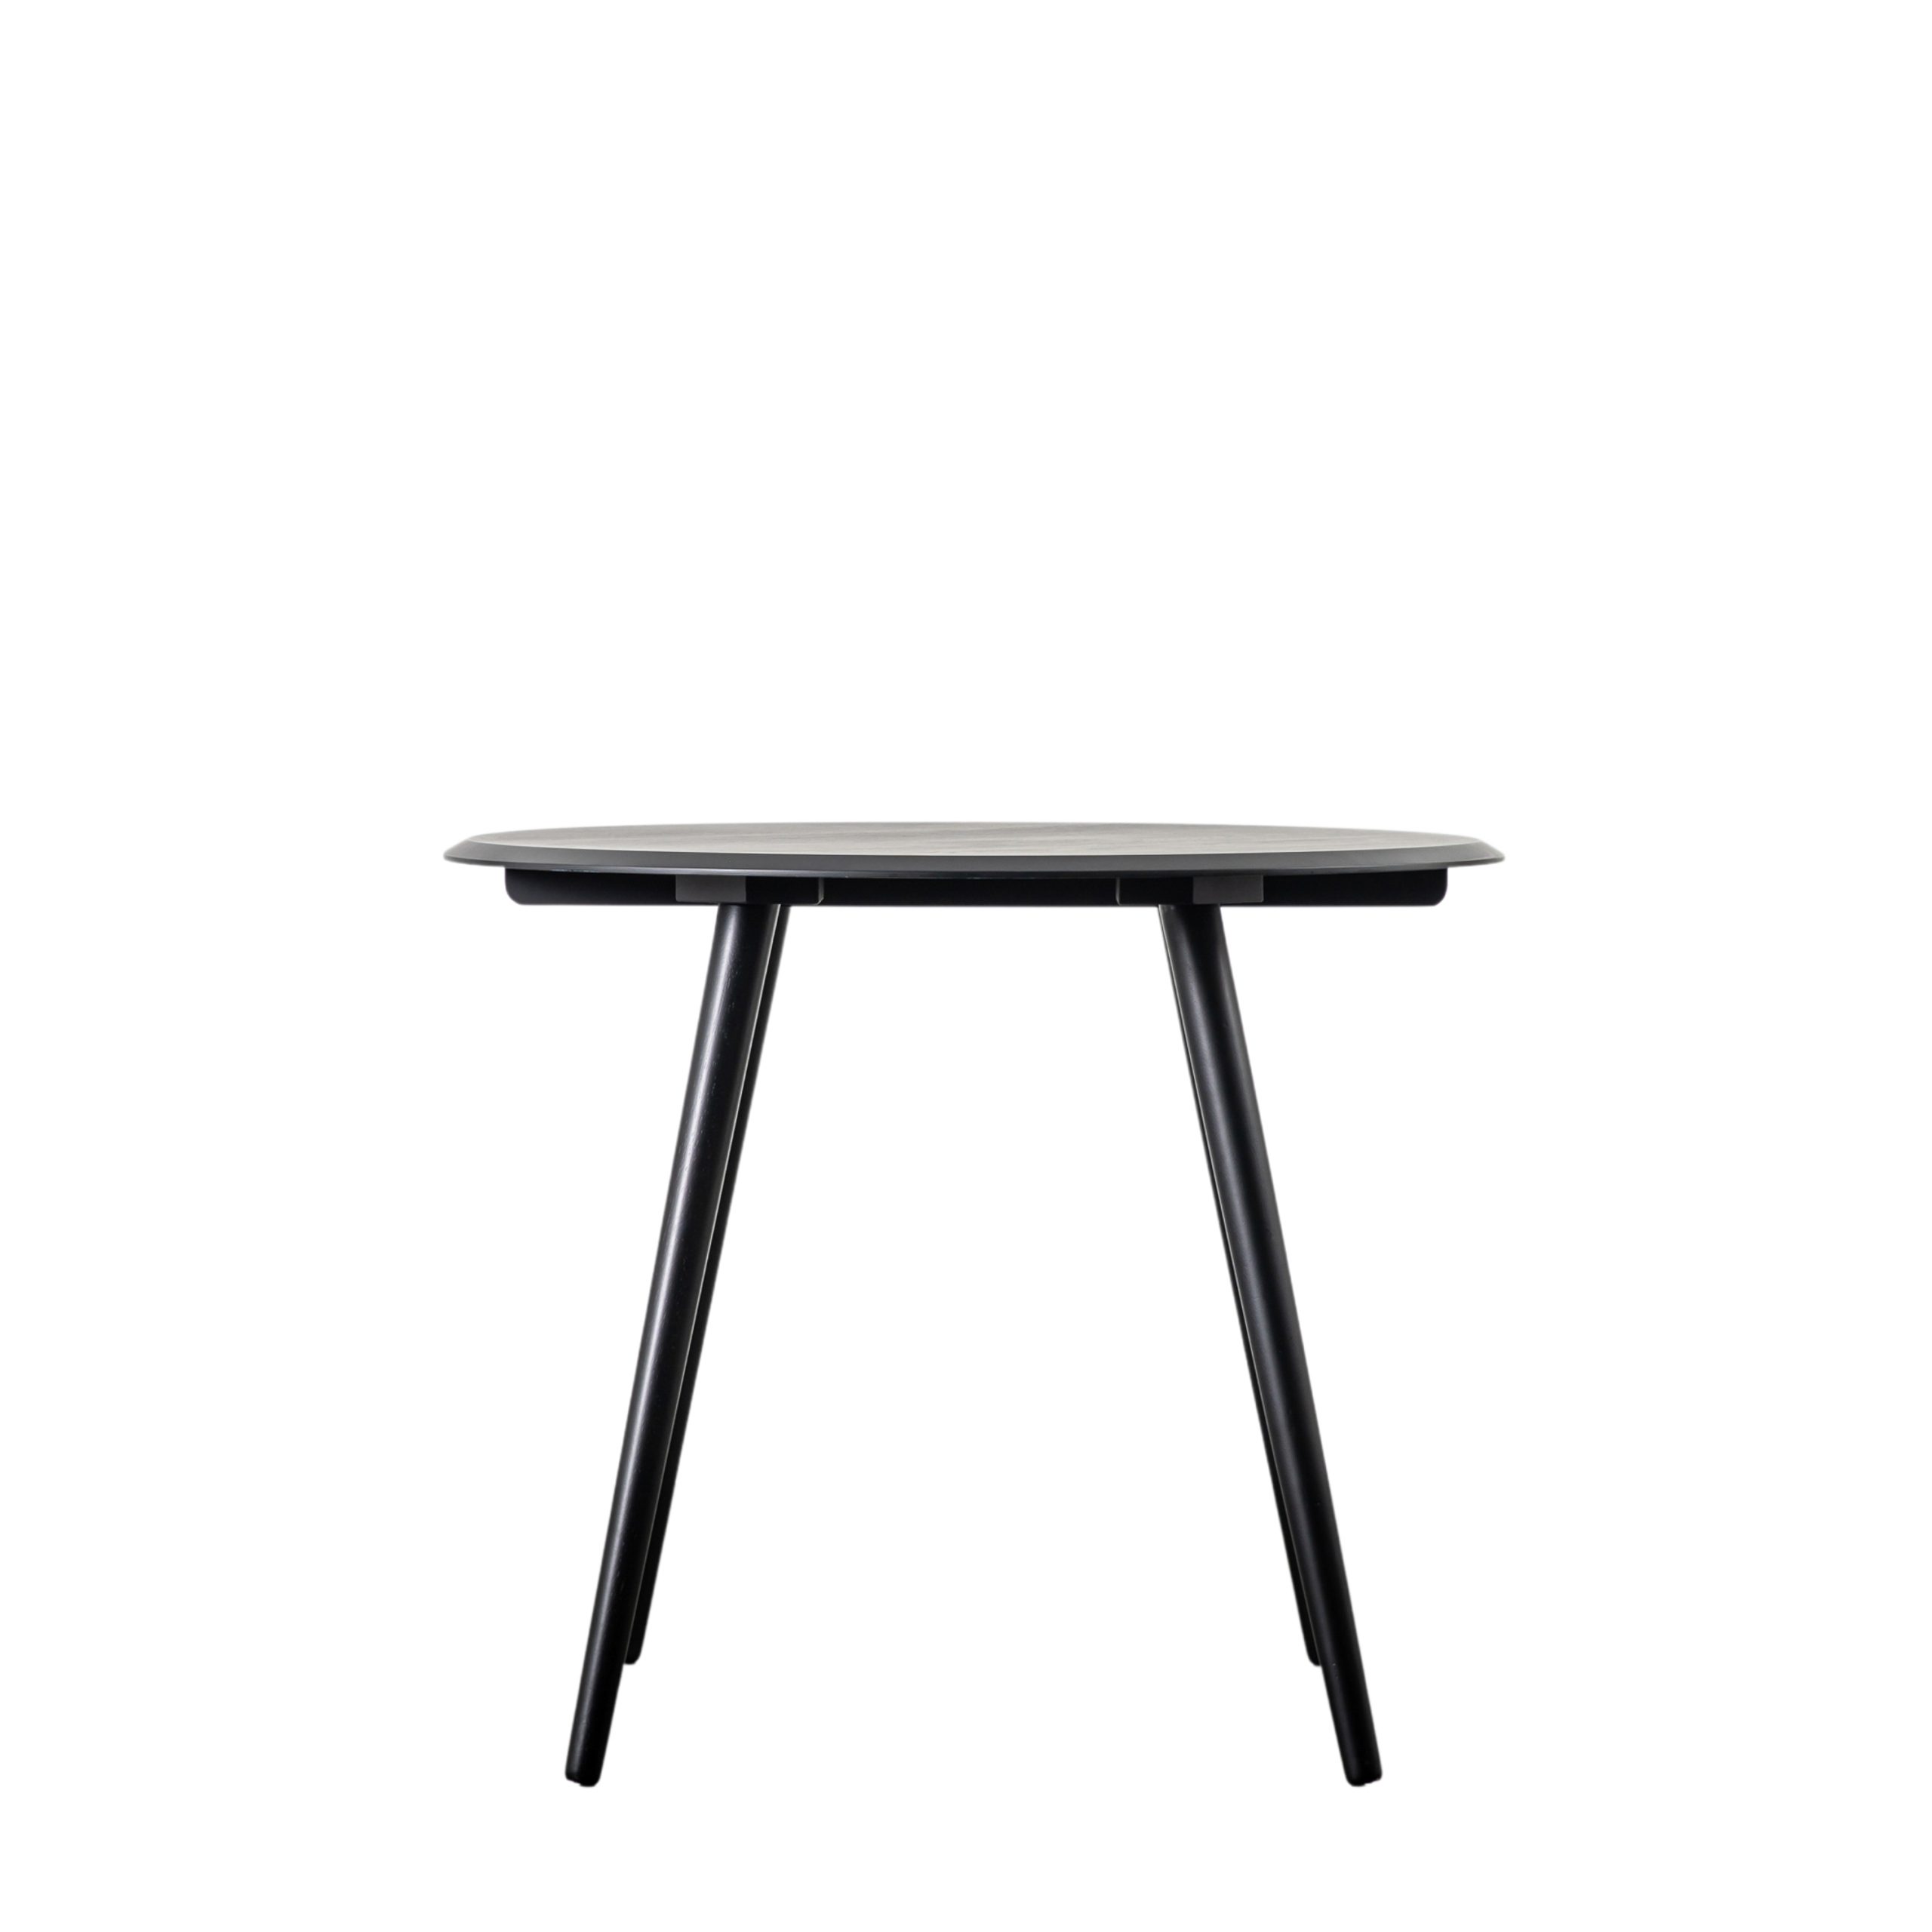 Gallery Direct Maddox Round Dining Table